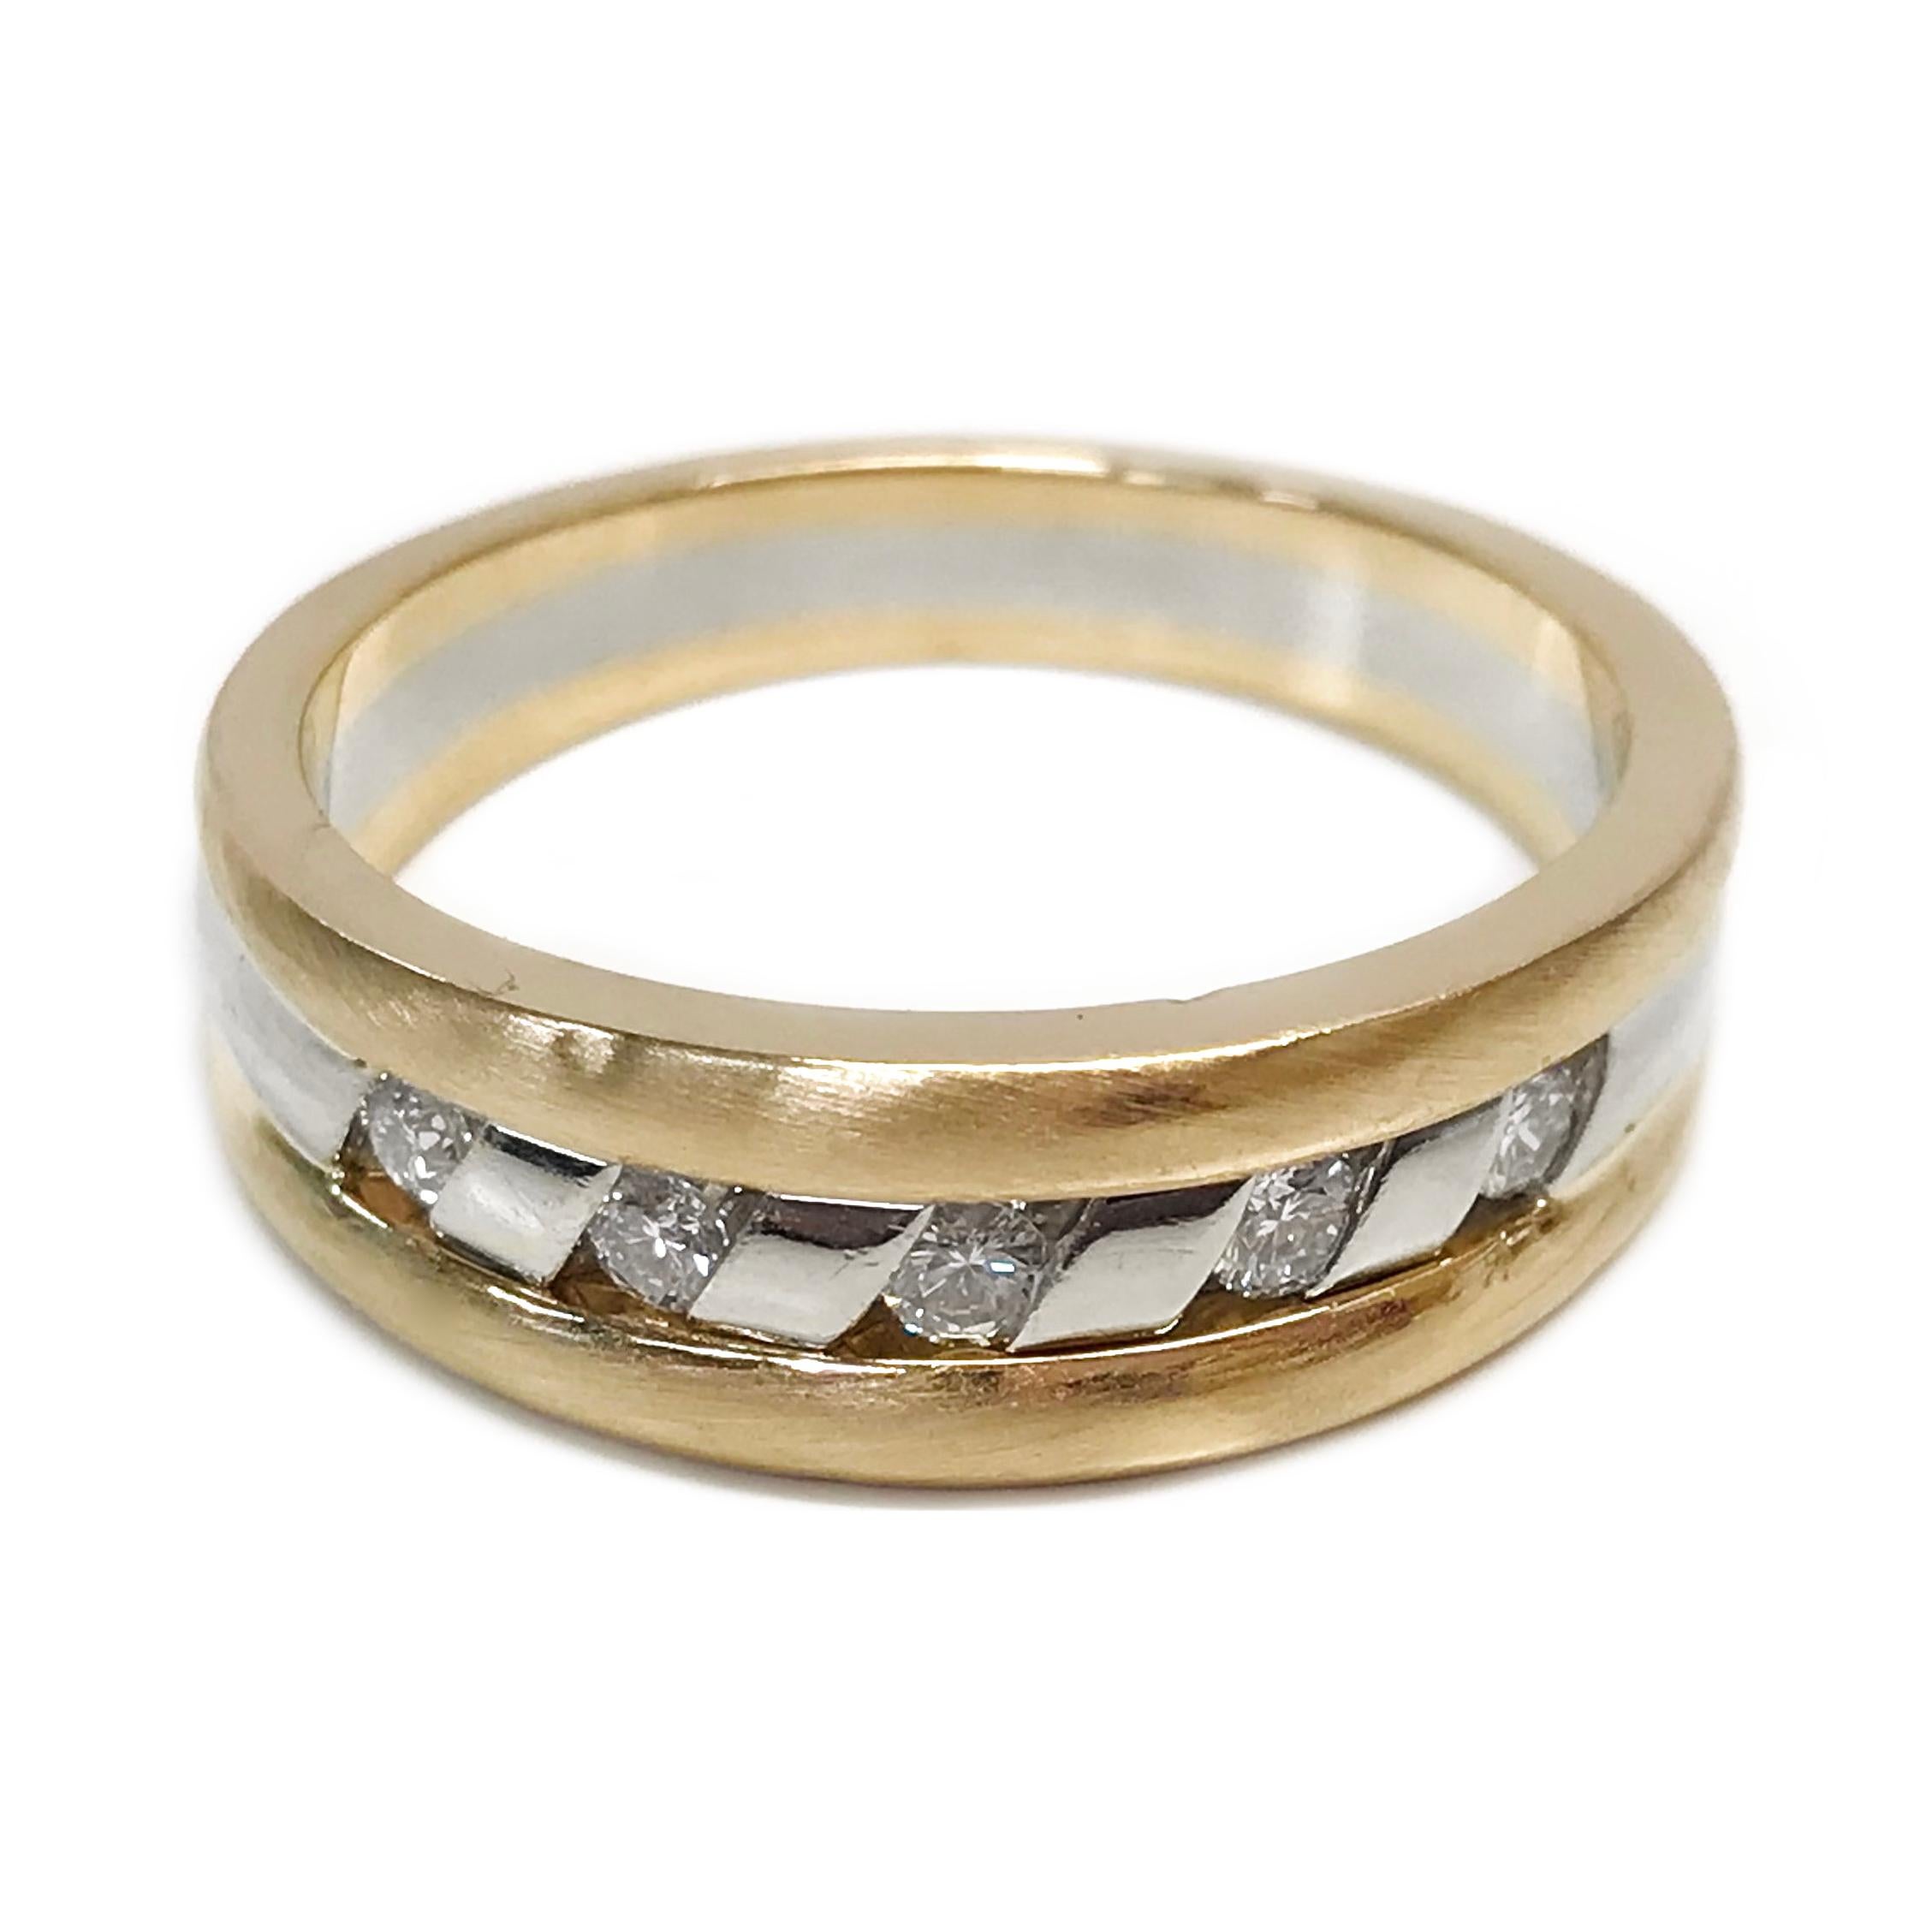 14 Karat Two-Tone Channel Set Diamond Ring. The band ring features five round diamonds channel-set in diagonal slots. There are yellow gold satin finish bands on the outer edges and a single shiny smooth finish band in white gold. The 2.5mm diamonds